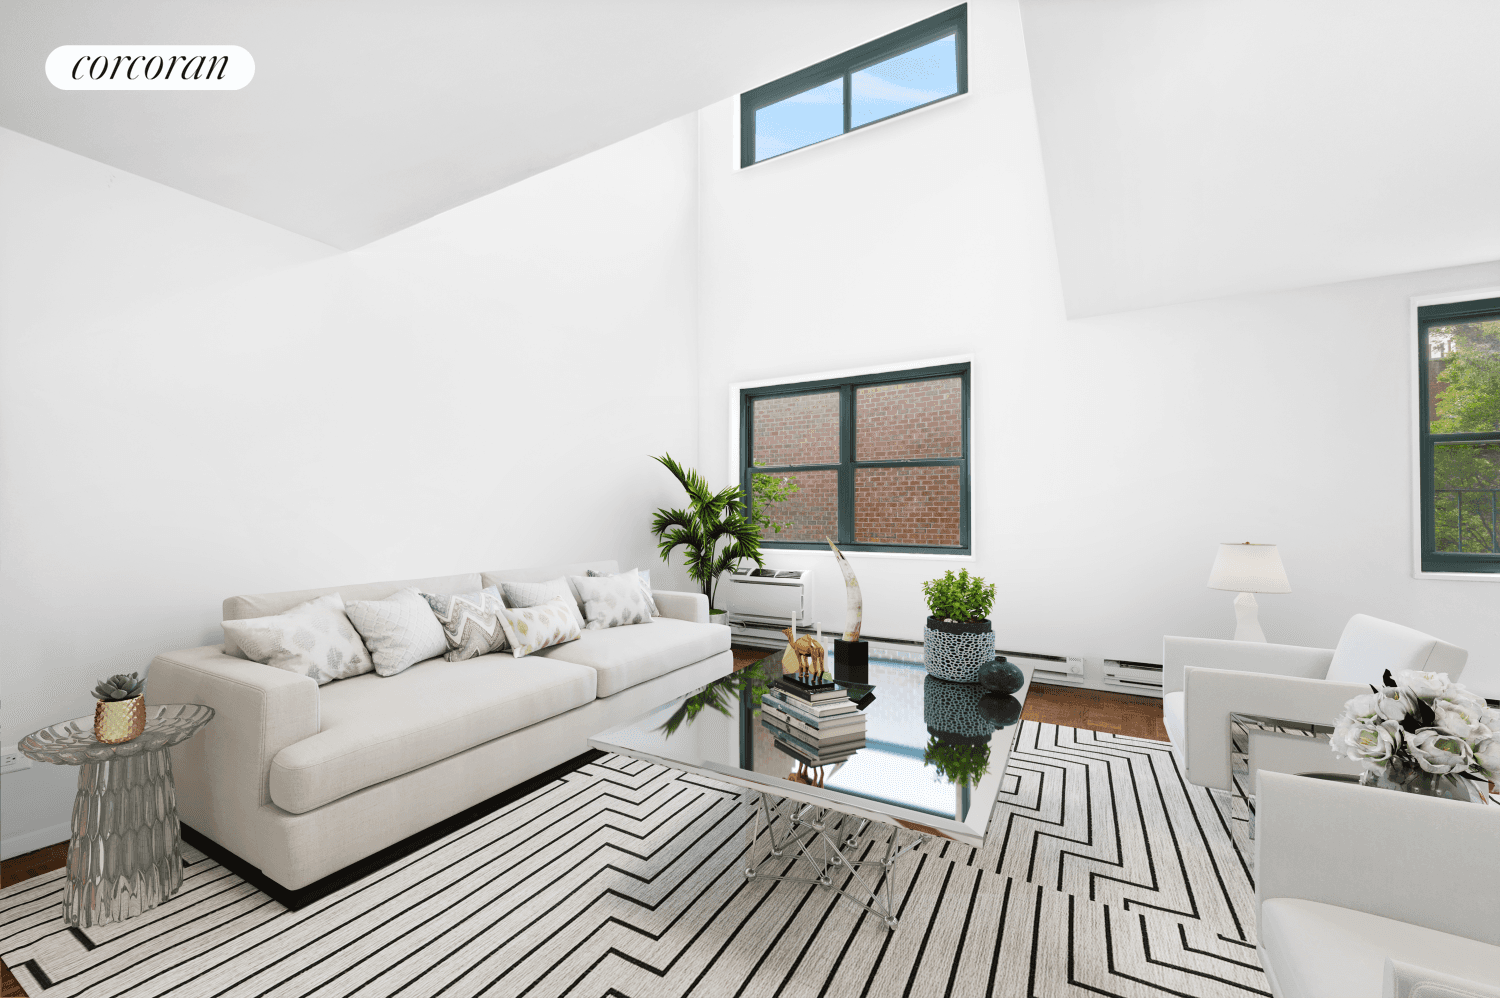 146 Bank street 4A presents the perfect opportunity for someone to bring their vision and create their dream 3 BR oasis in the heart of the West Village.